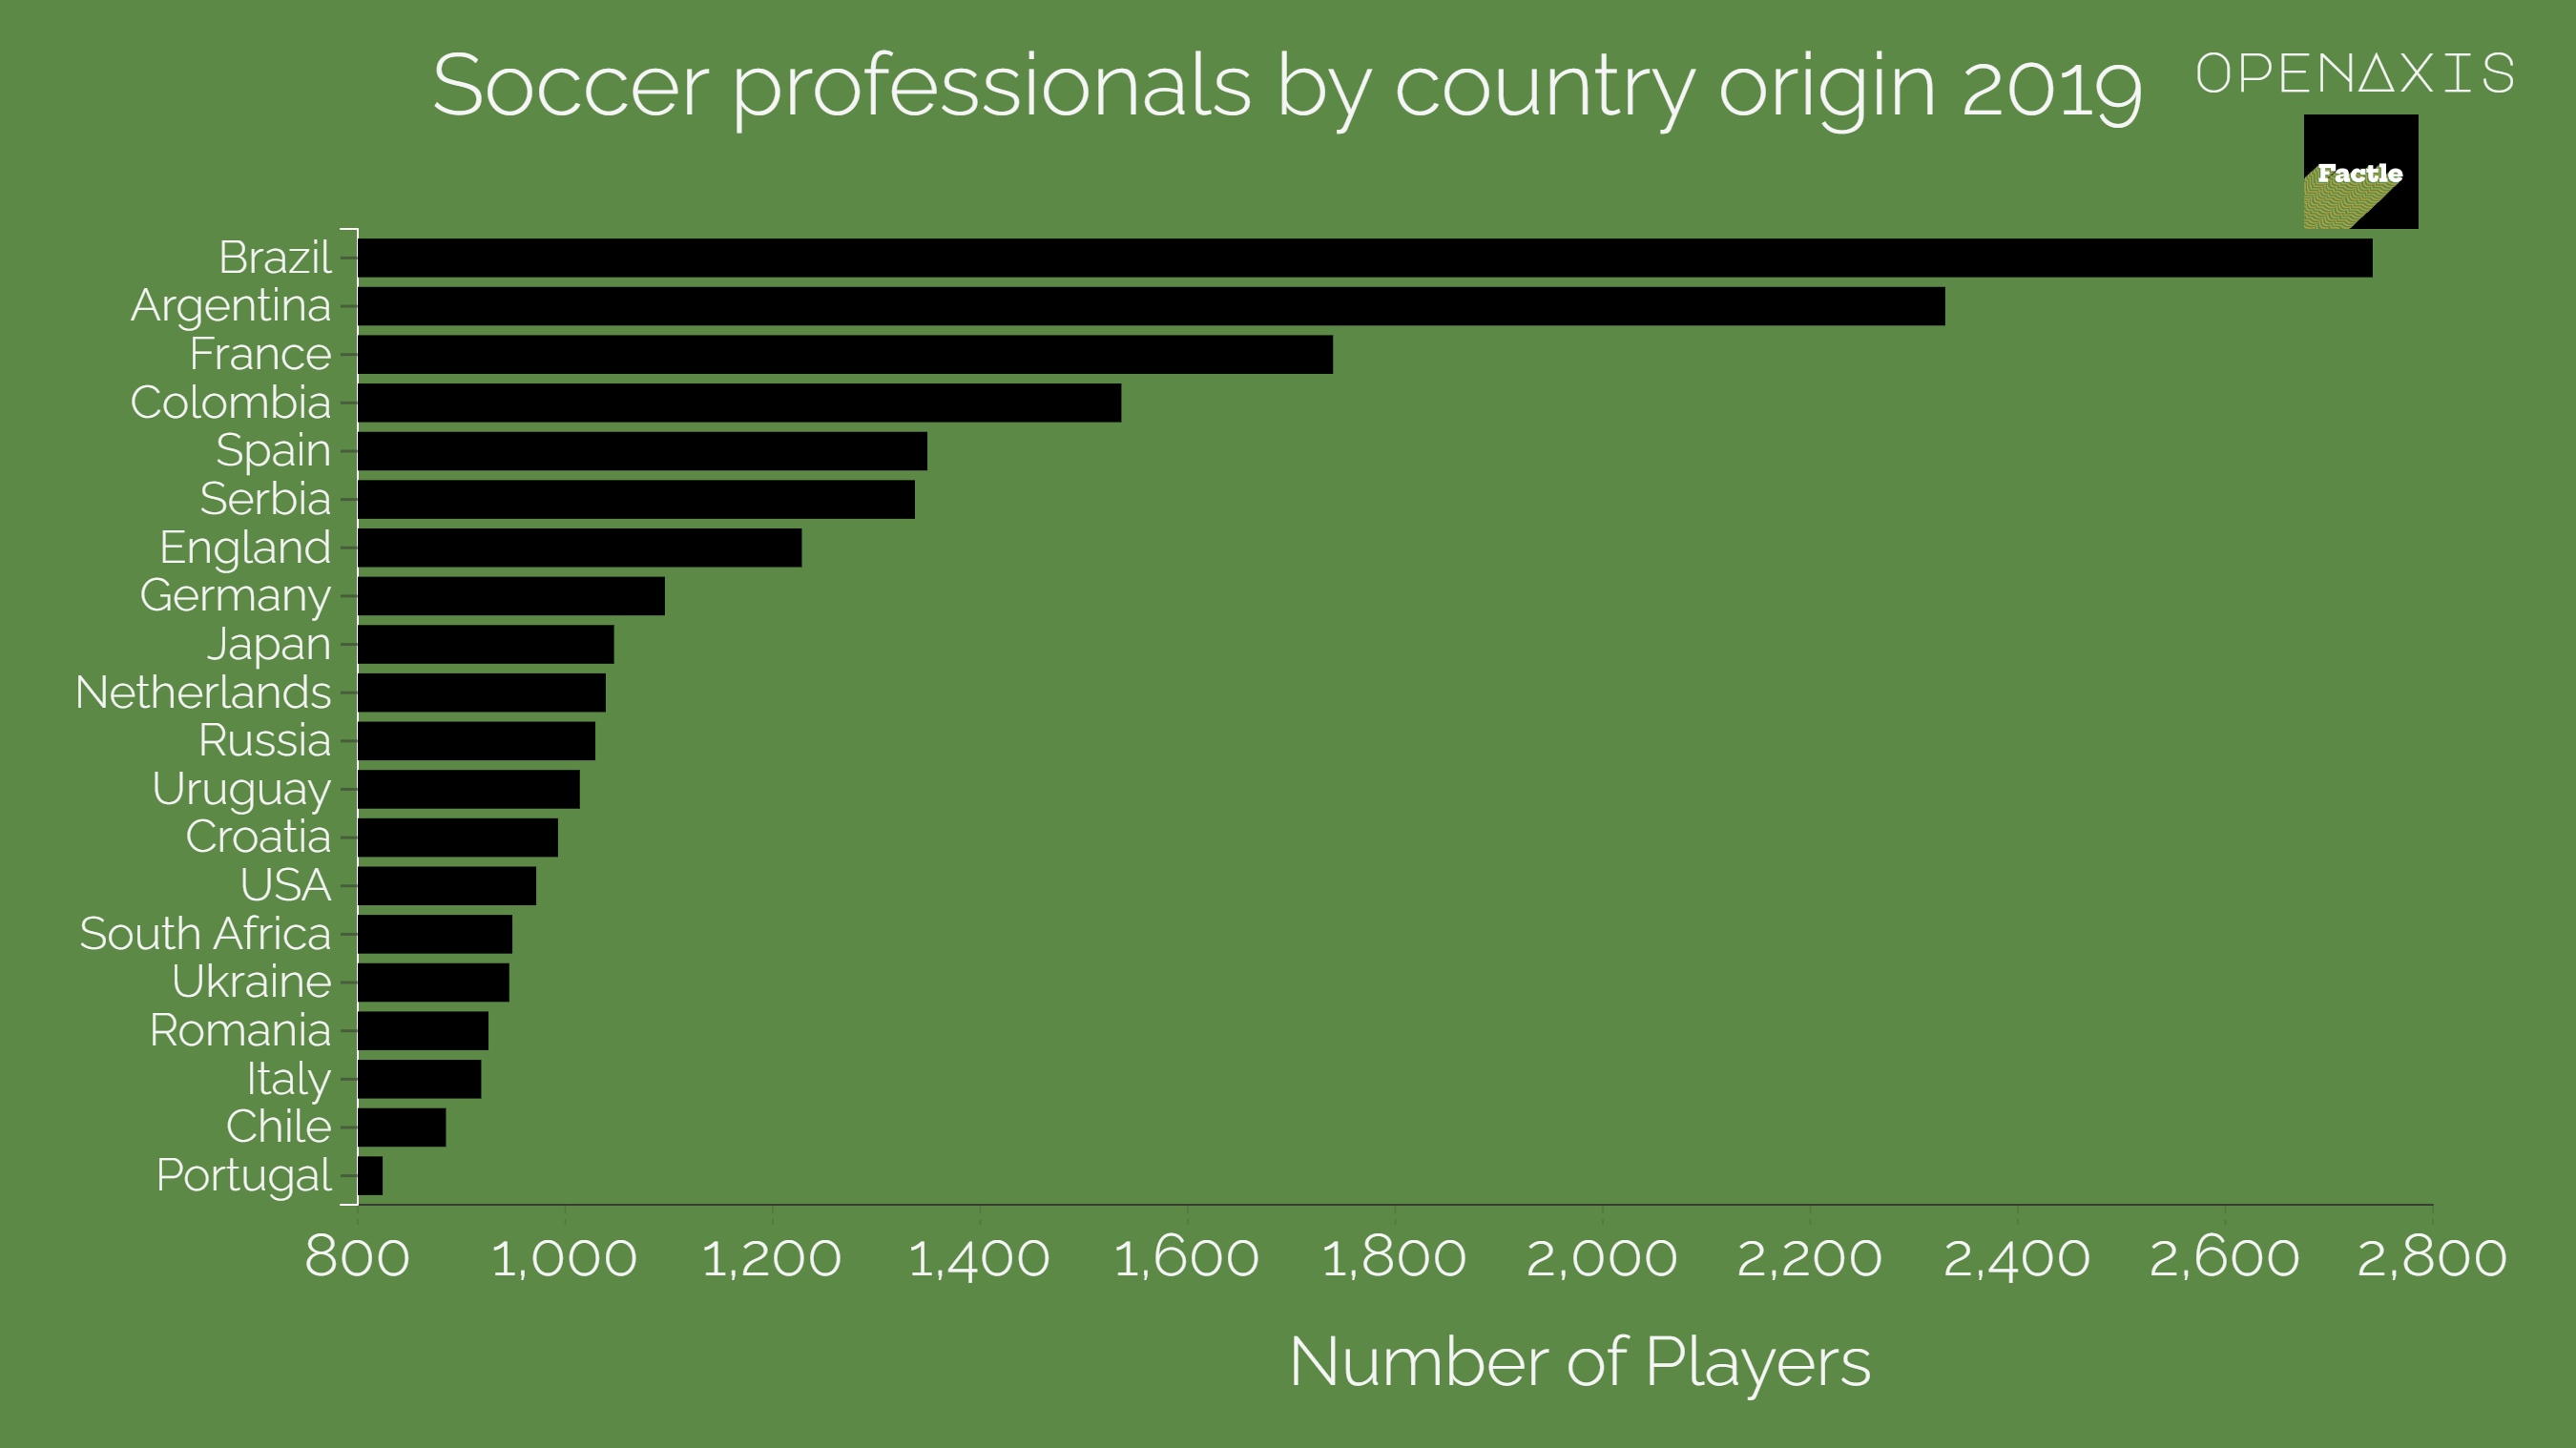 "Soccer professionals by country origin 2019"